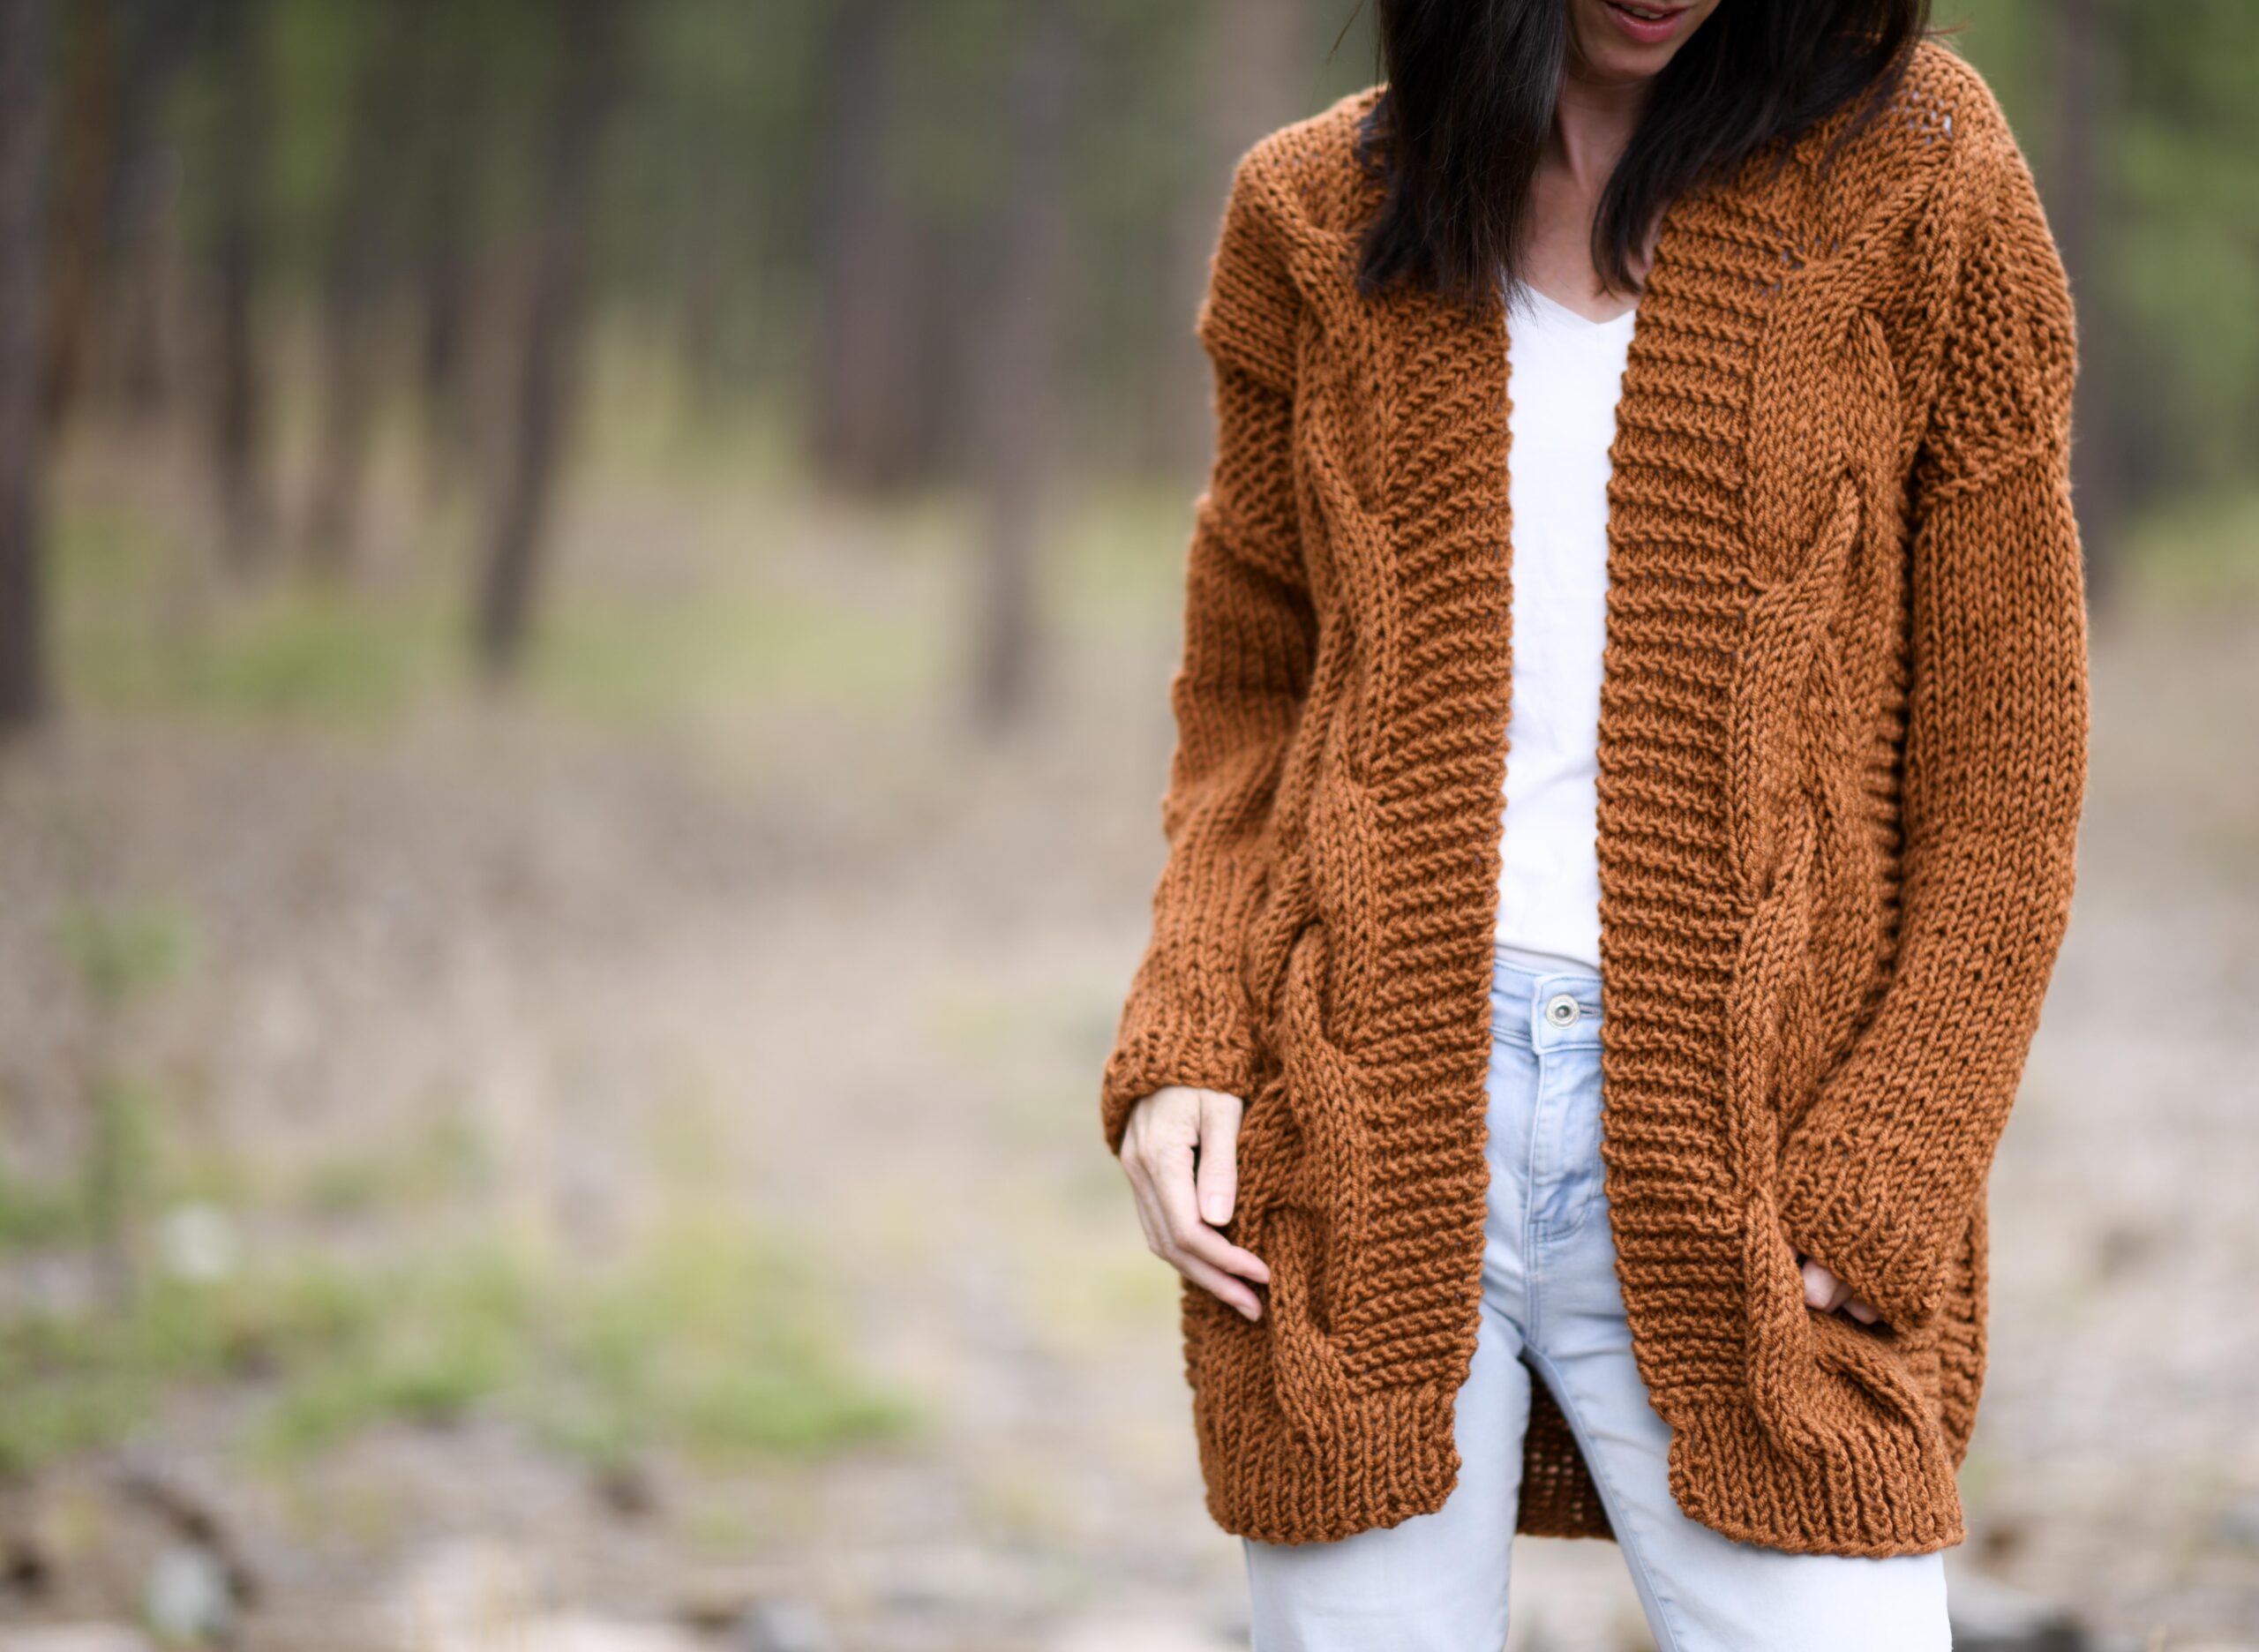 Celsea Button Up Crochet Cardigan - A Crocheted Simplicity